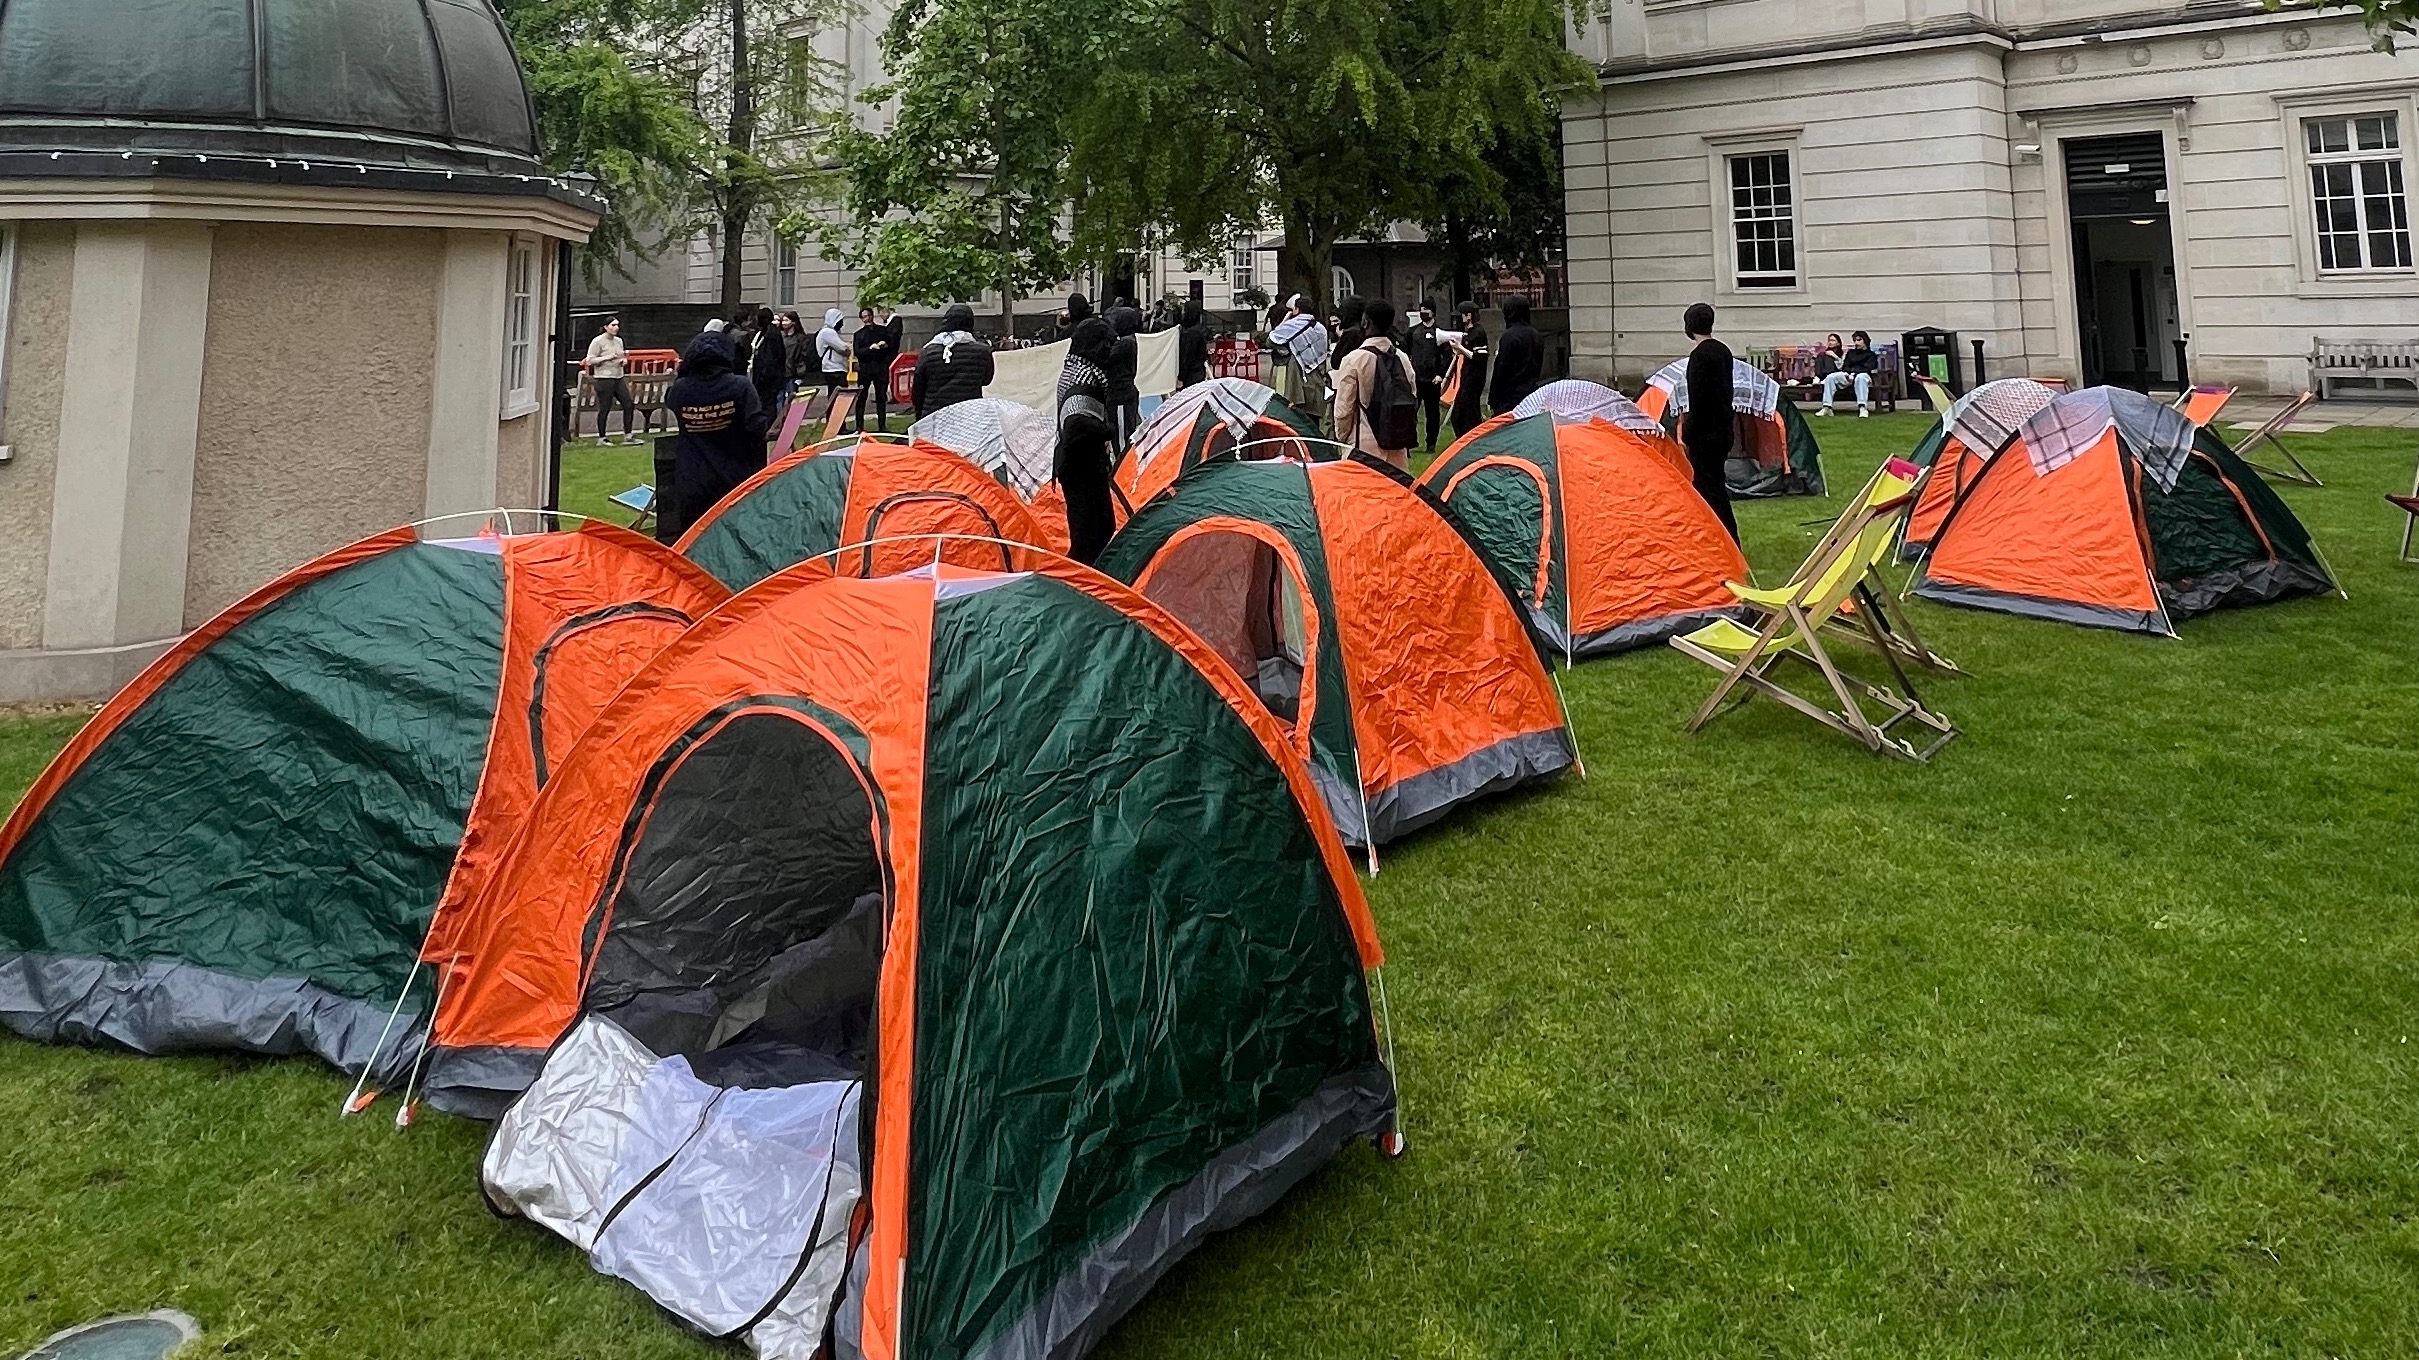 UK: UCL students attempt to replicate US protest encampments against Gaza war